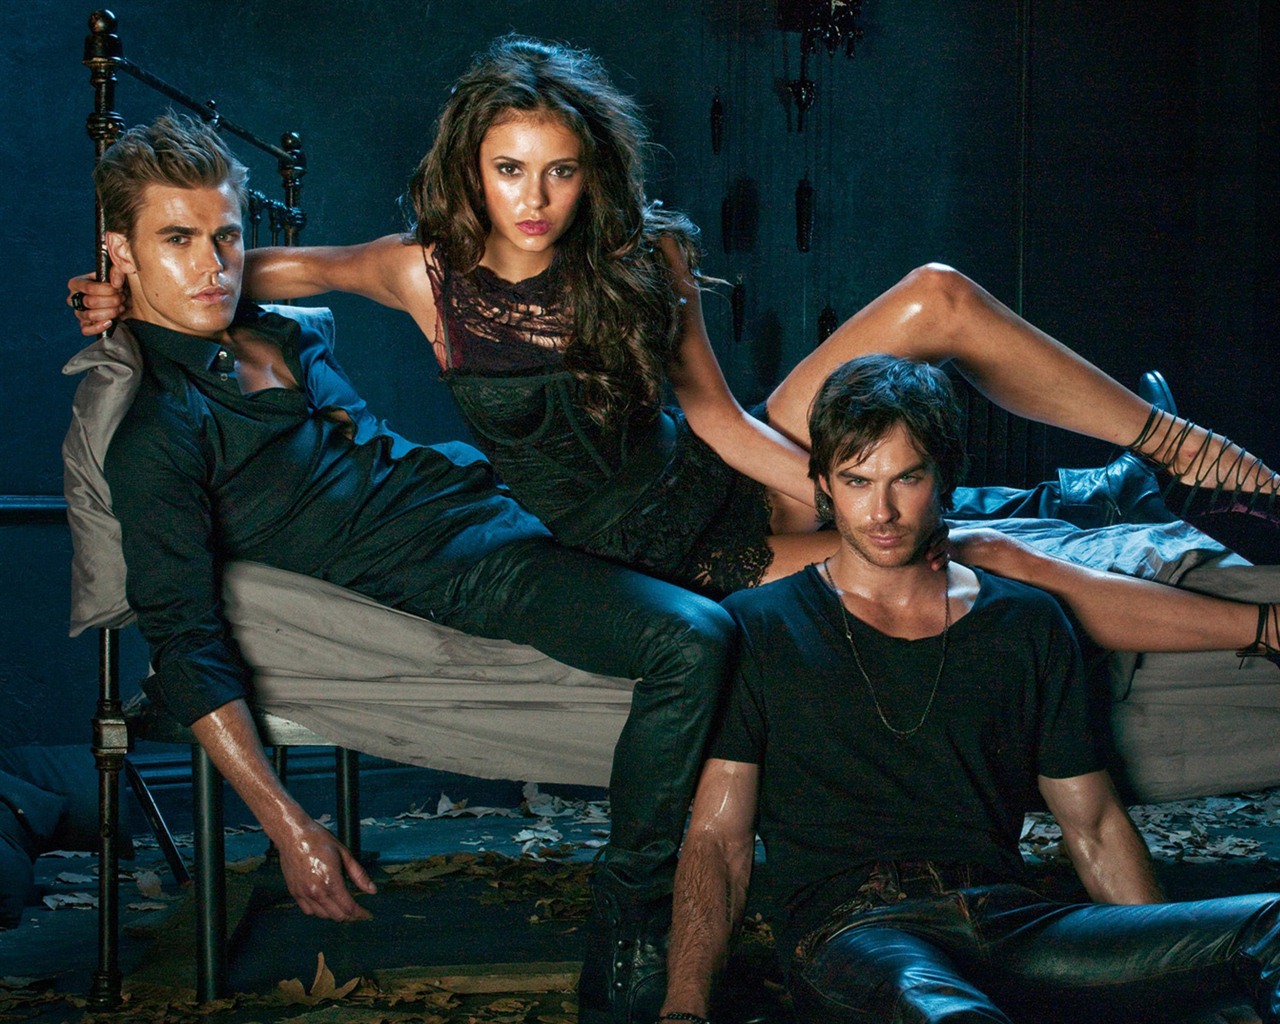 The Vampire Diaries HD Wallpapers #20 - 1280x1024